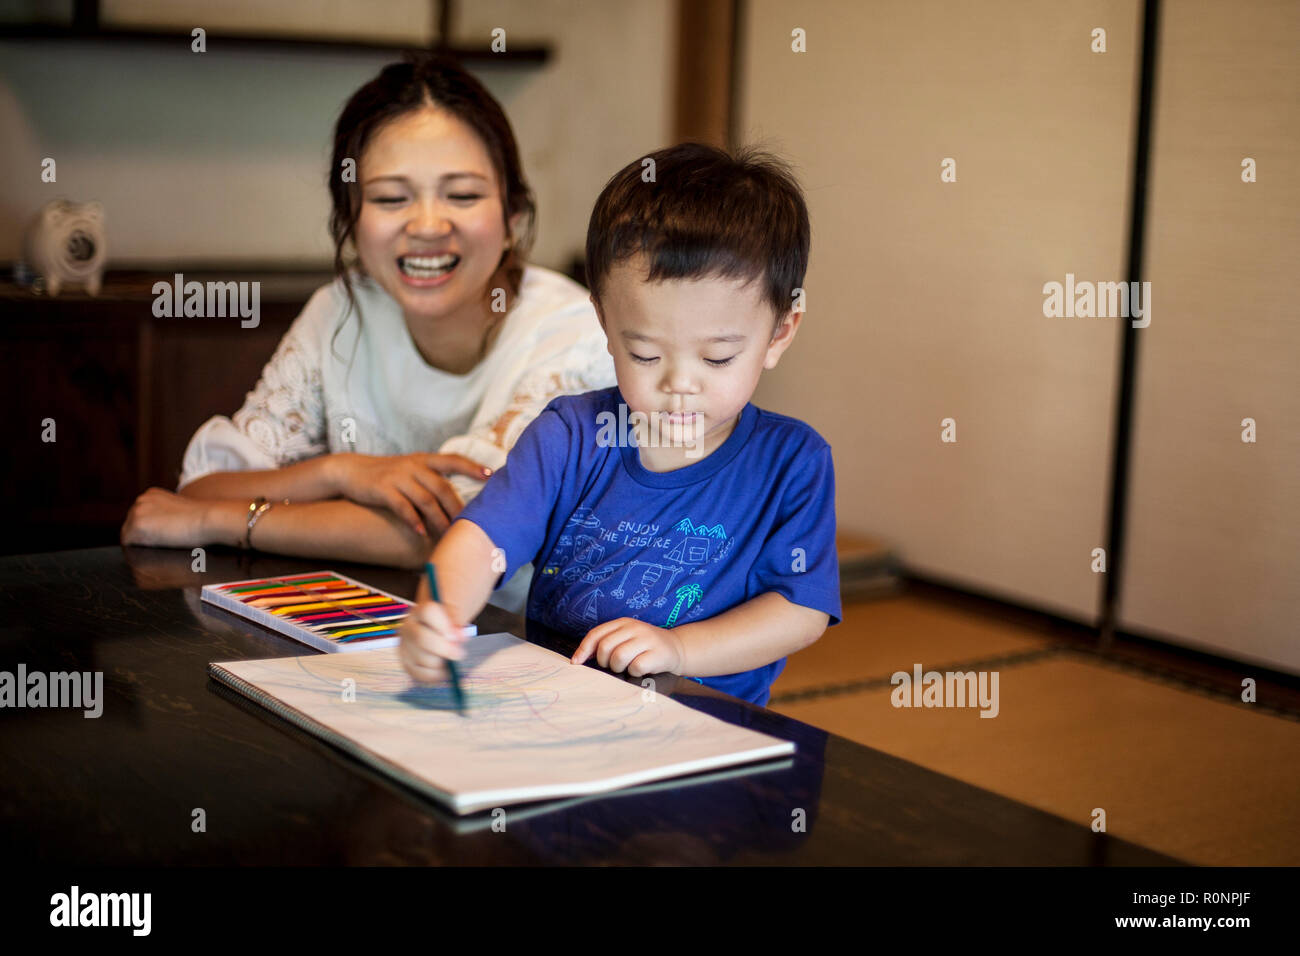 Smiling Japanese woman and little boy sitting at a table, drawing on white paper with colouring pens. Stock Photo